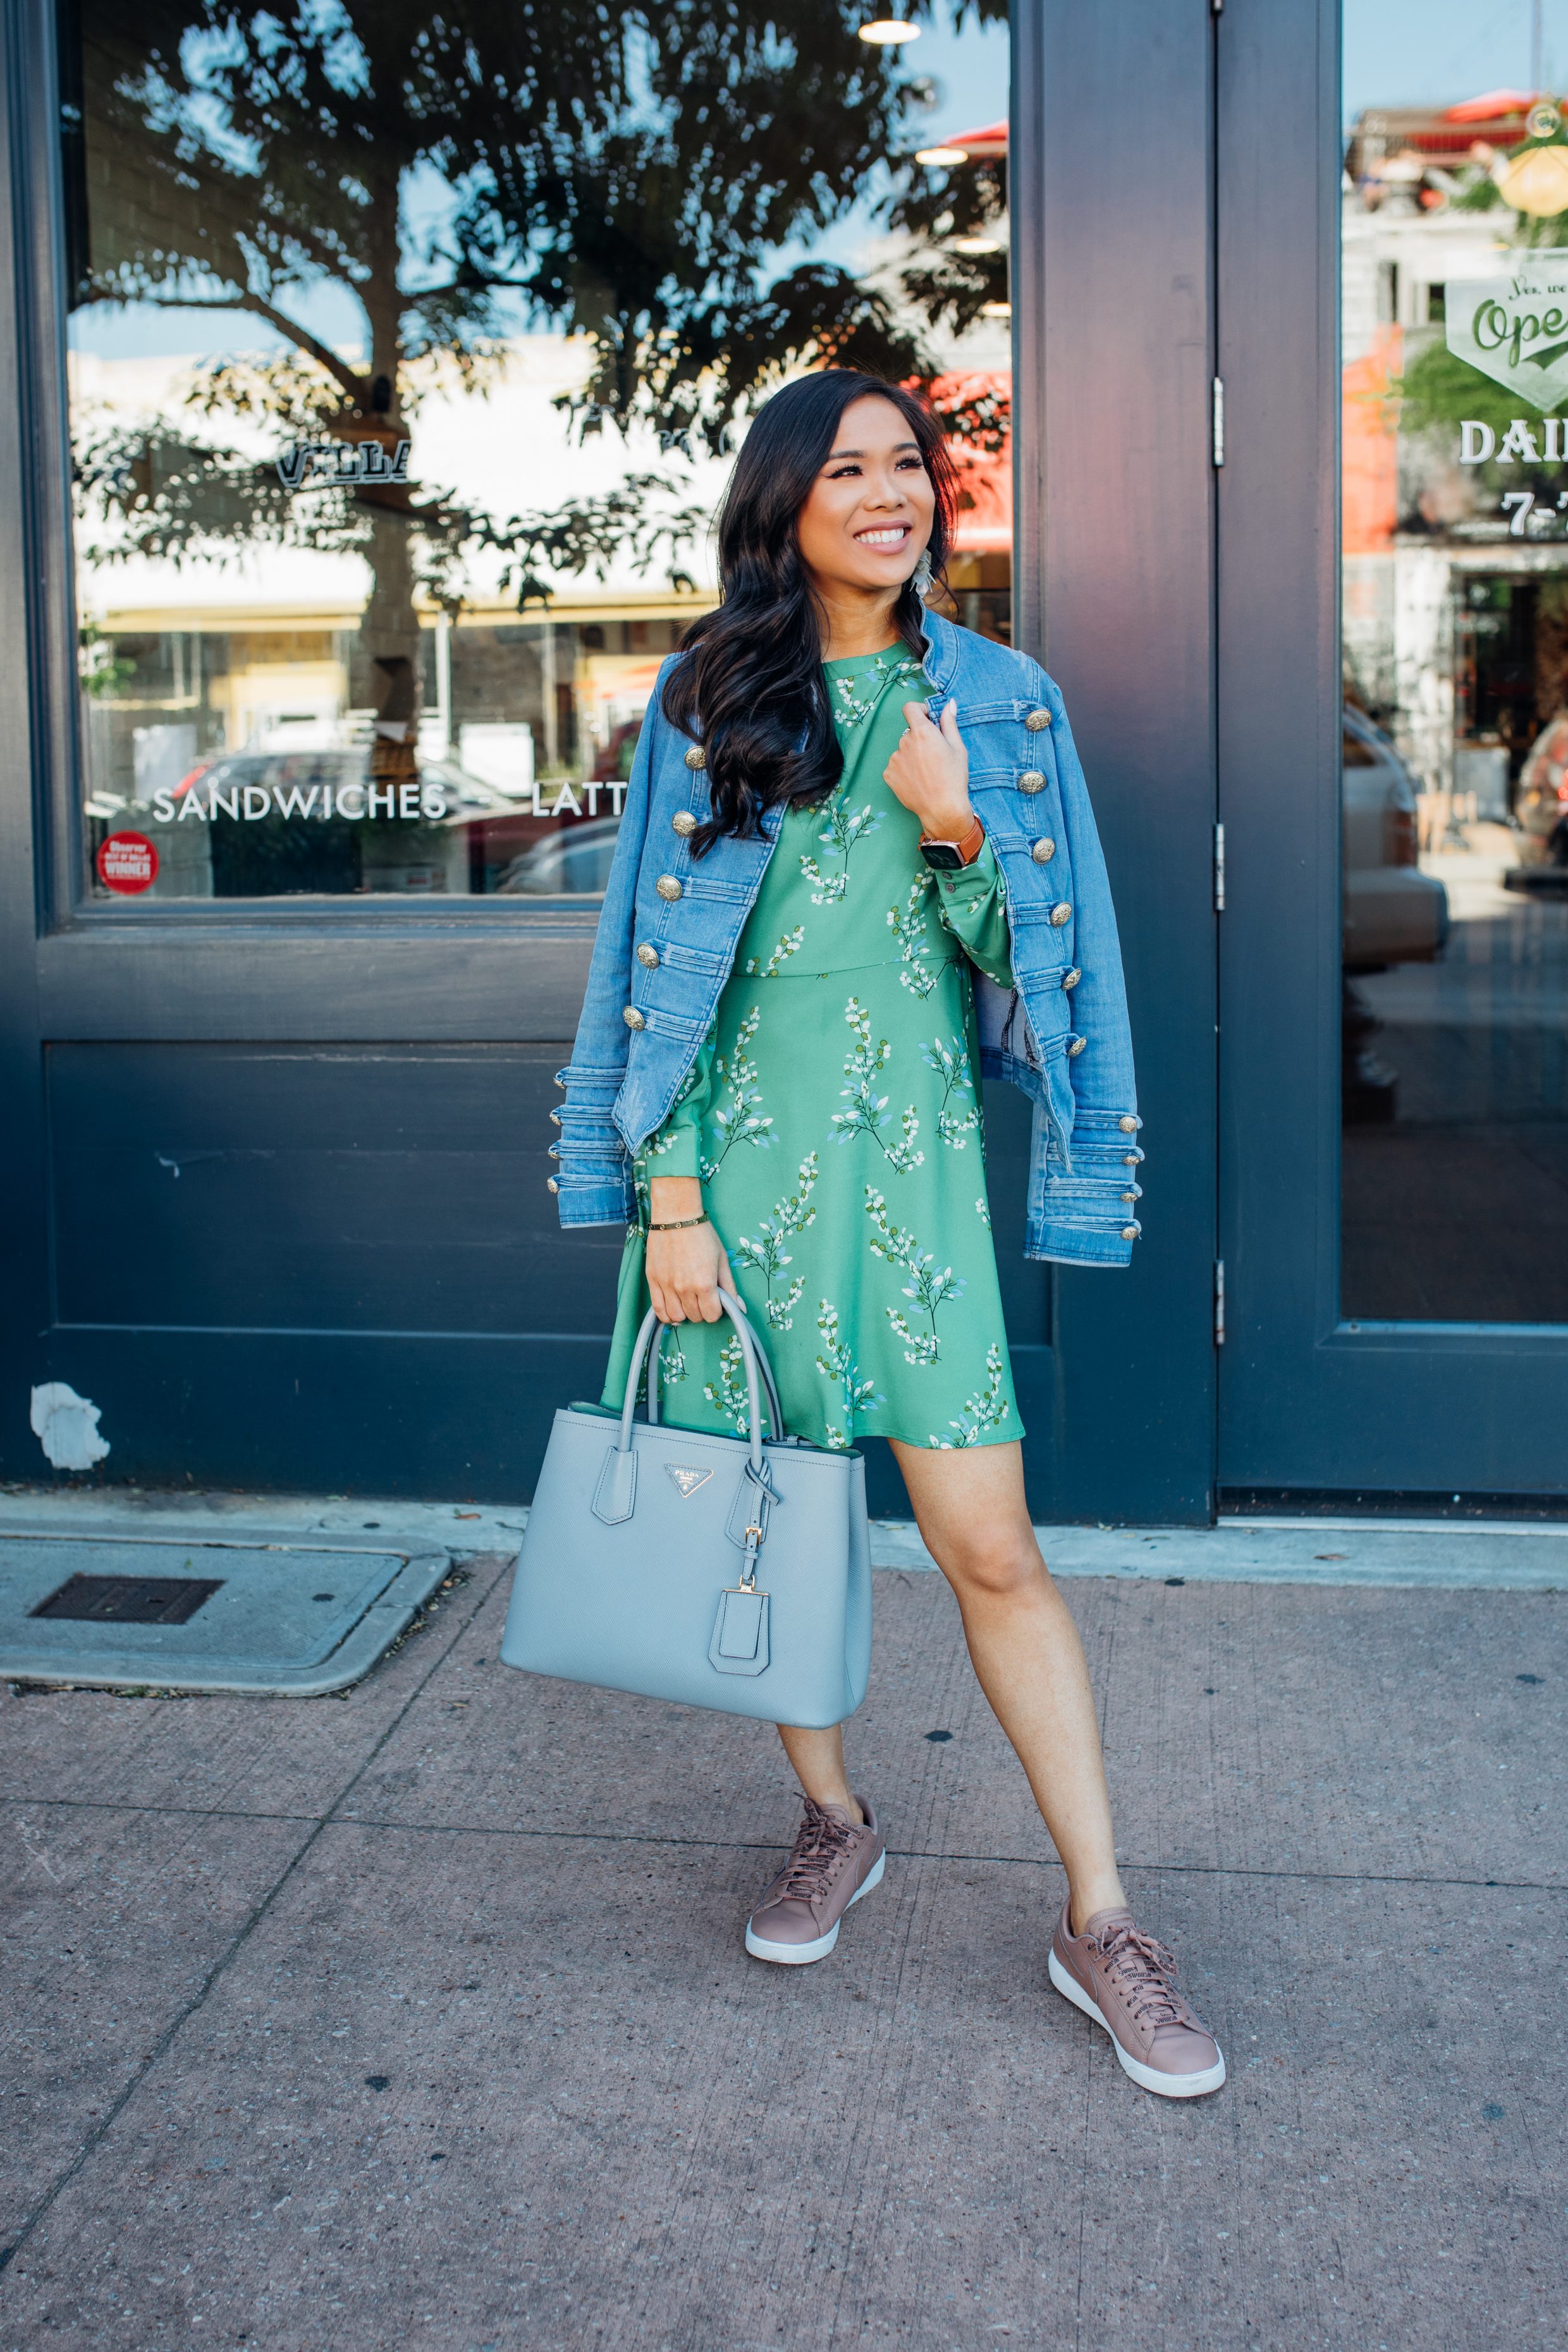 Blogger Hoang-Kim shares how to wear one dress two ways for work and the weekend